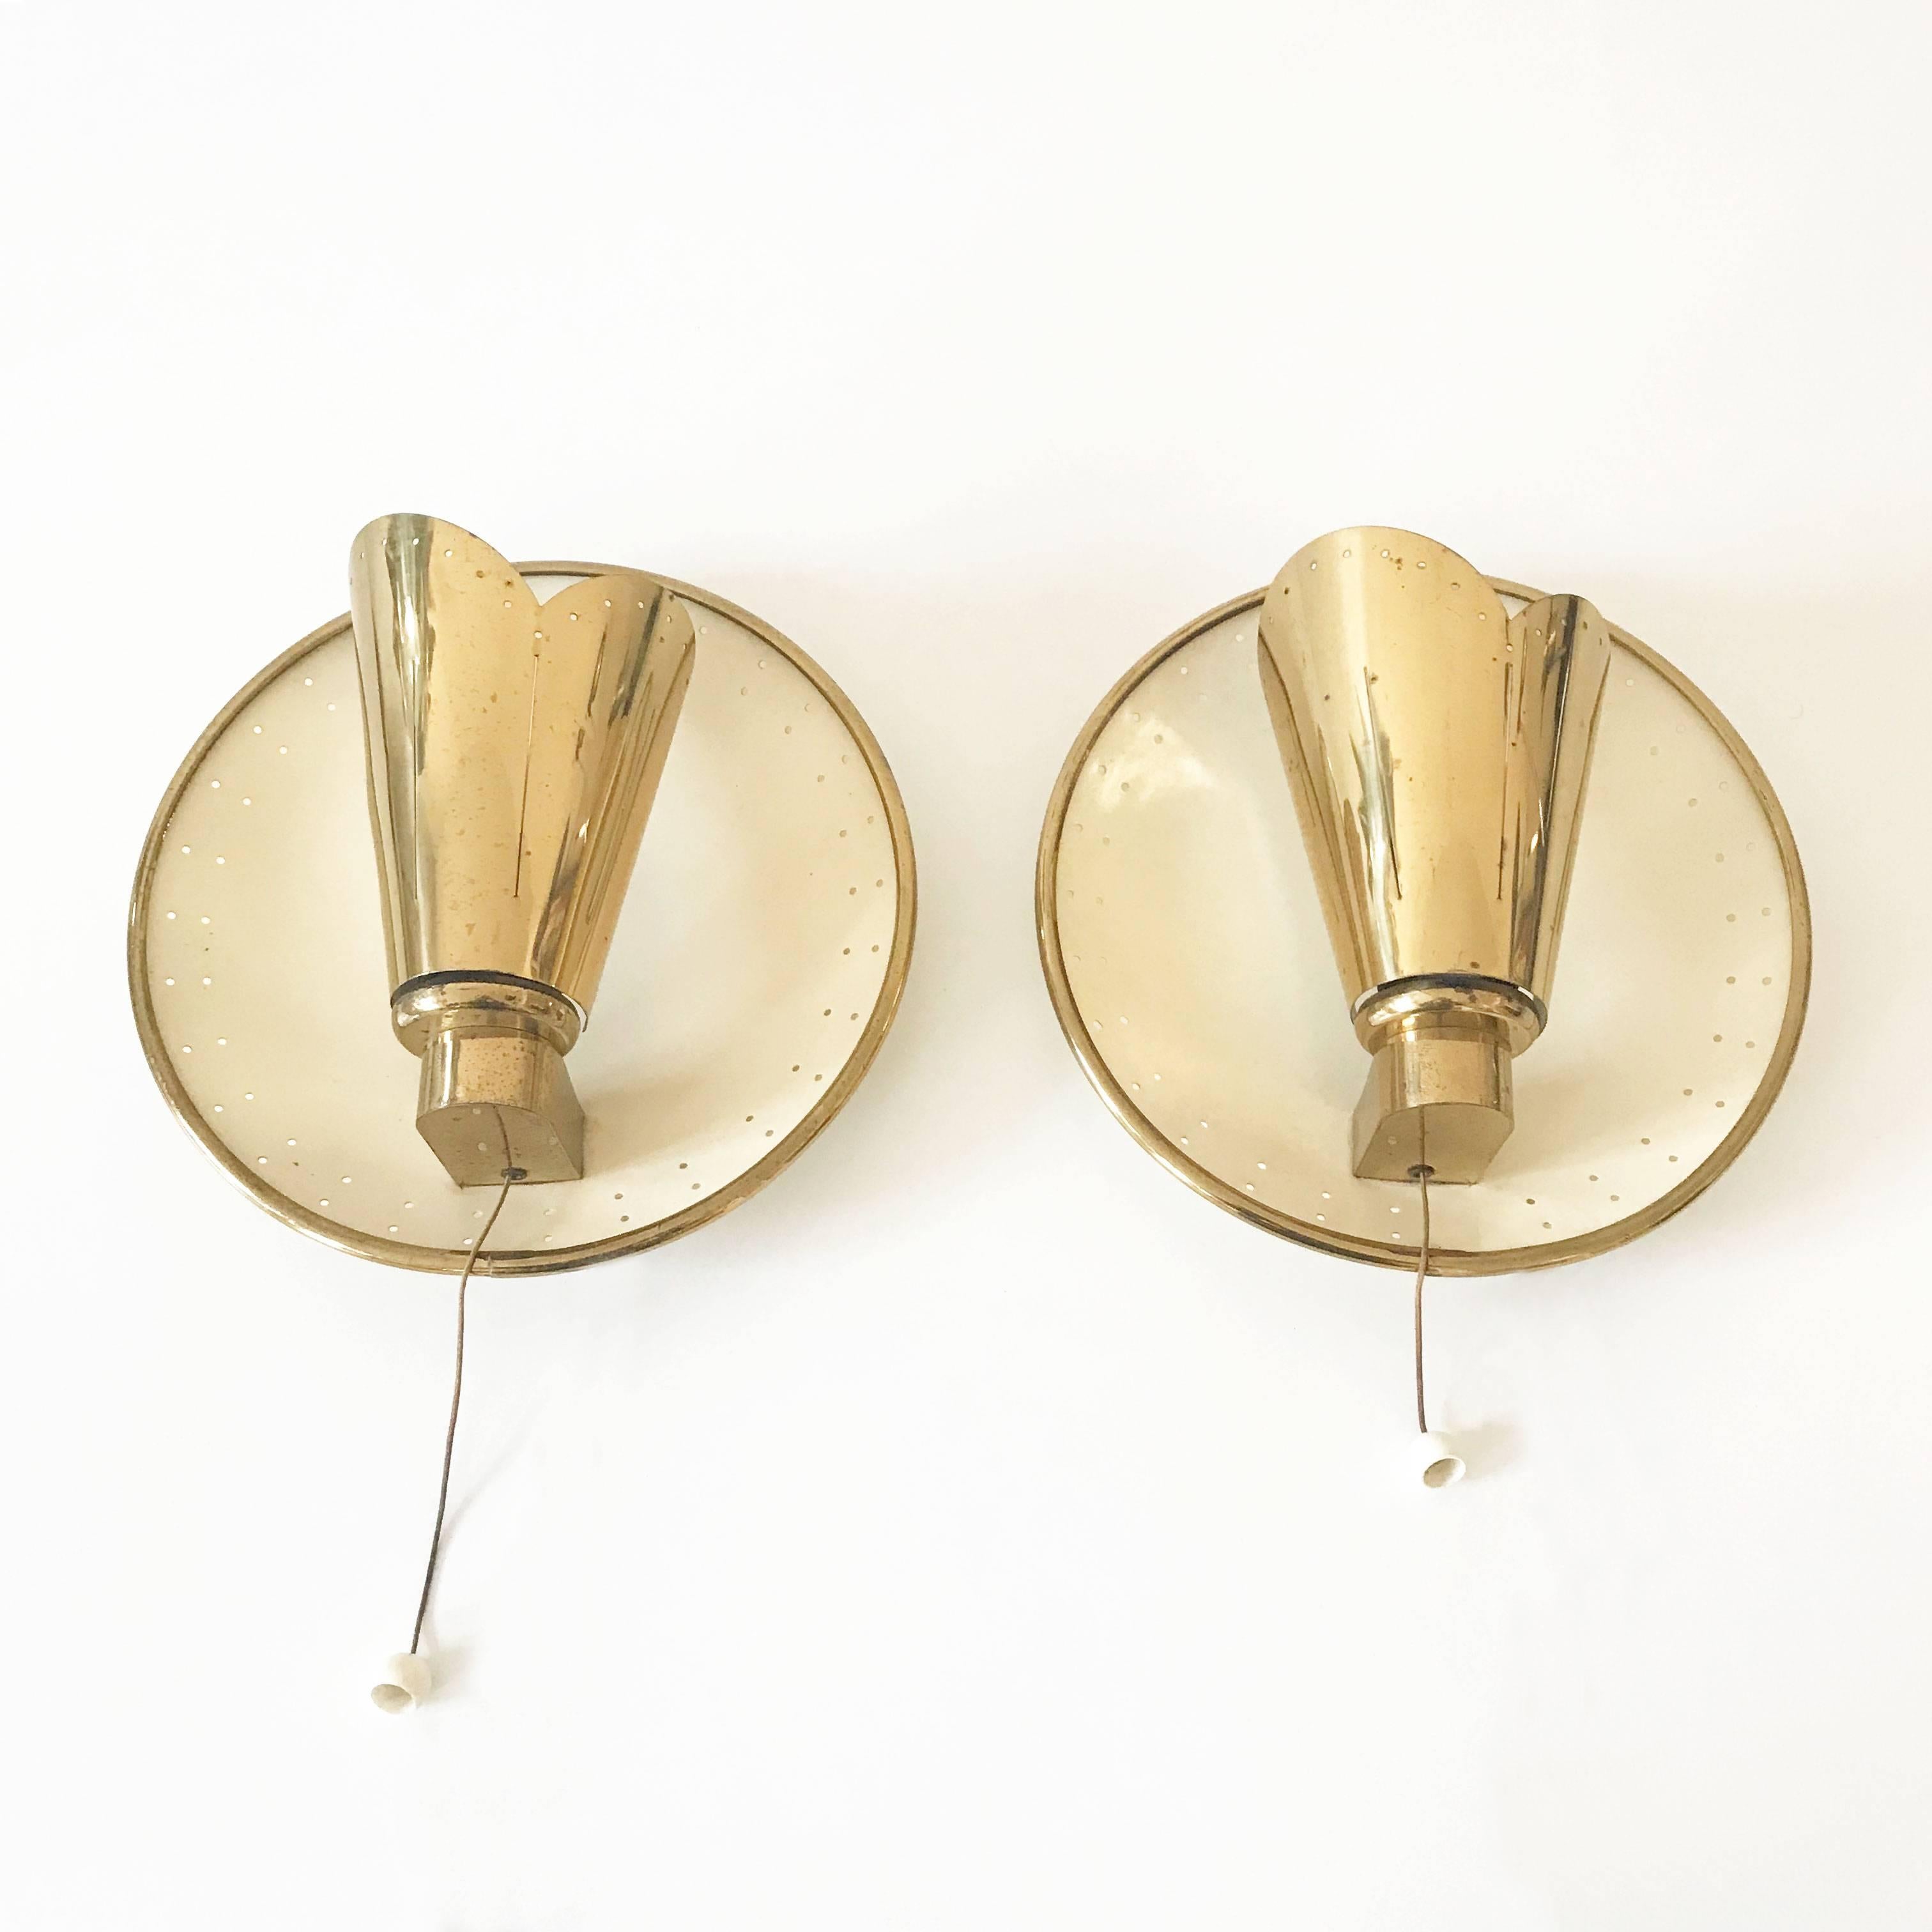 Lacquered Set of Two Elegant Mid Century Modern Sconces or Wall Lamps by Jacques Biny